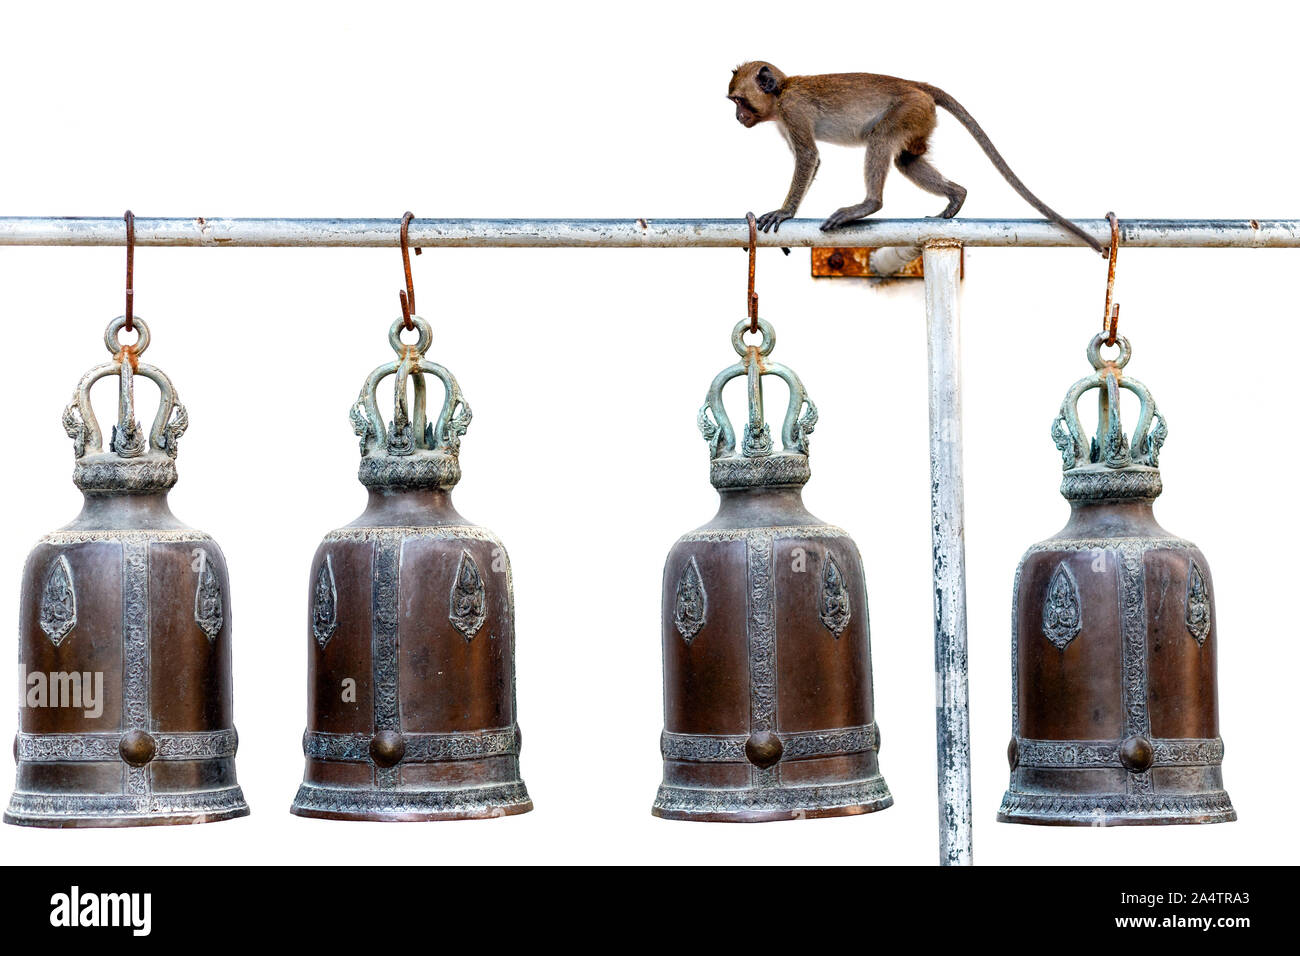 Monkey walking on a metal pole with Buddhist temple bells isolated on white background Stock Photo